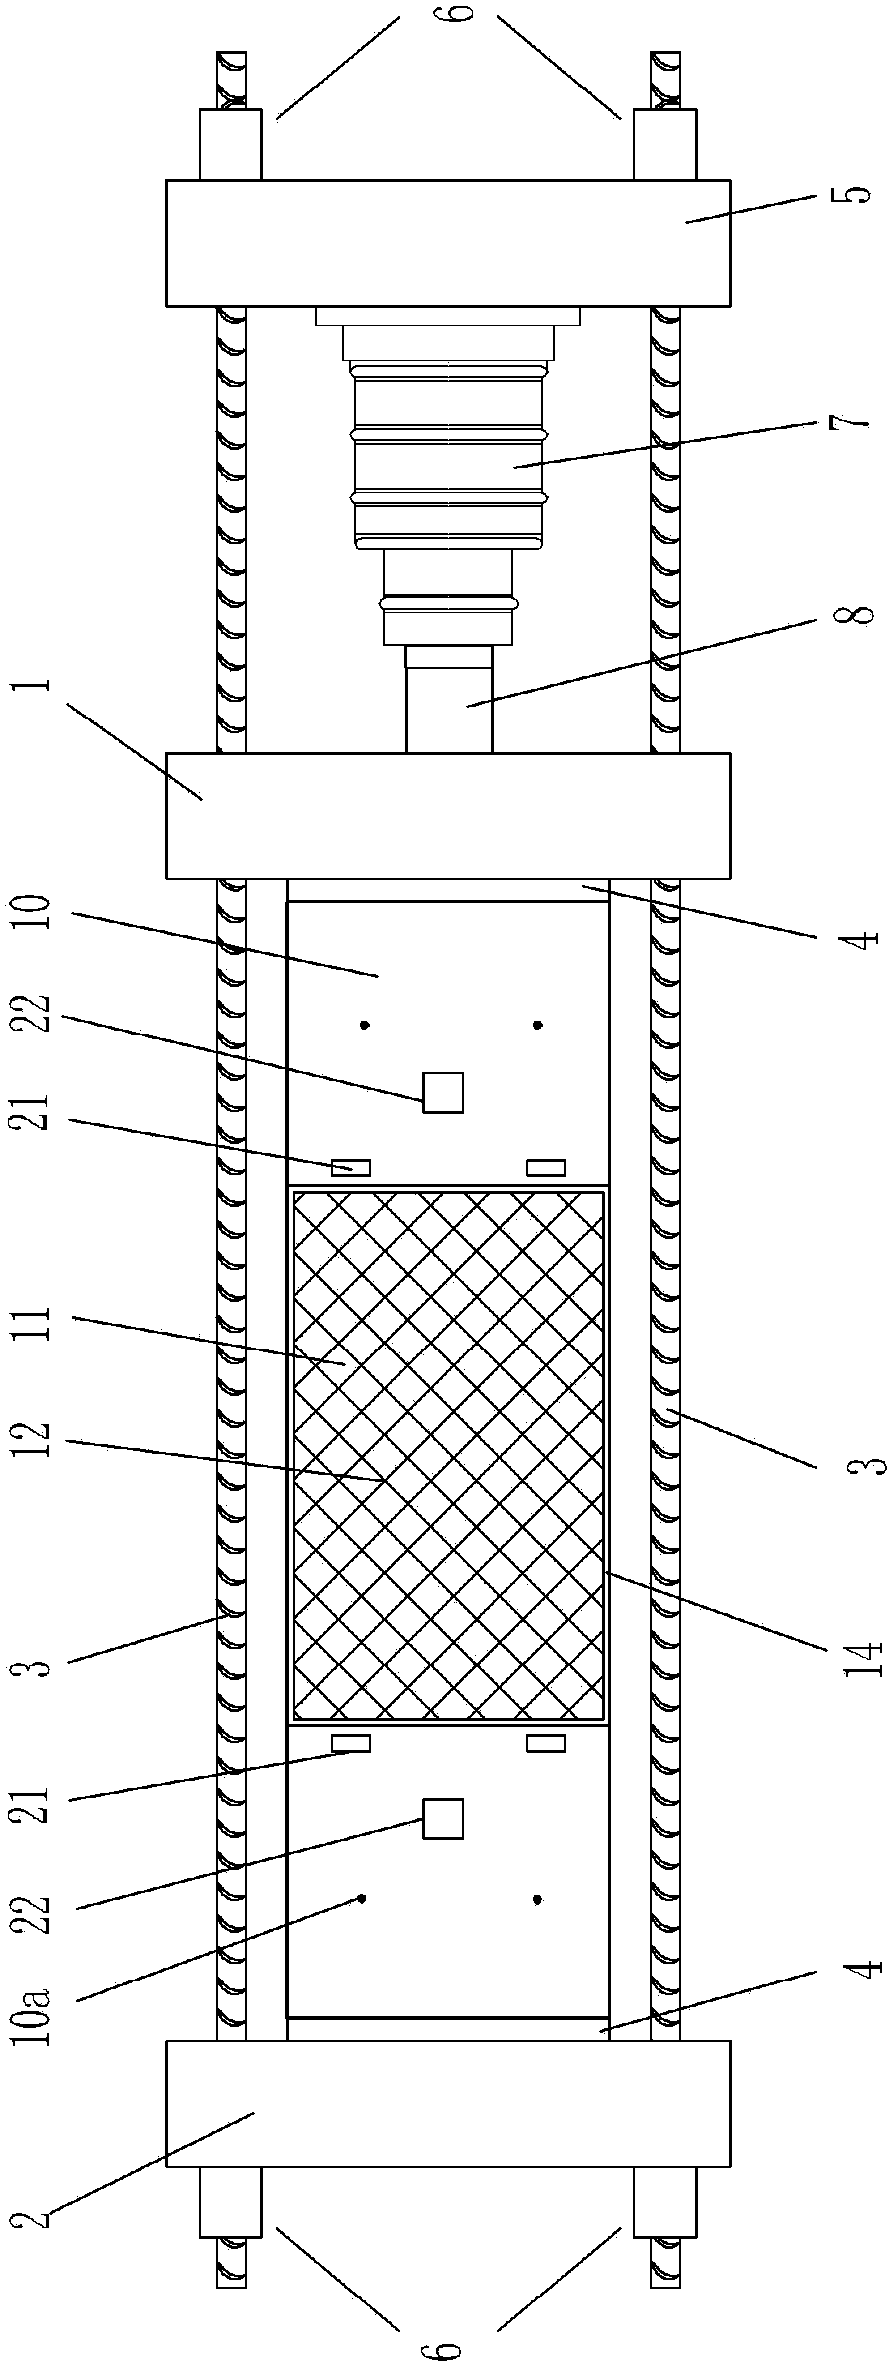 Accelerated Corrosion Deterioration Test Device for Tunnel Lining Structure under Loading Condition